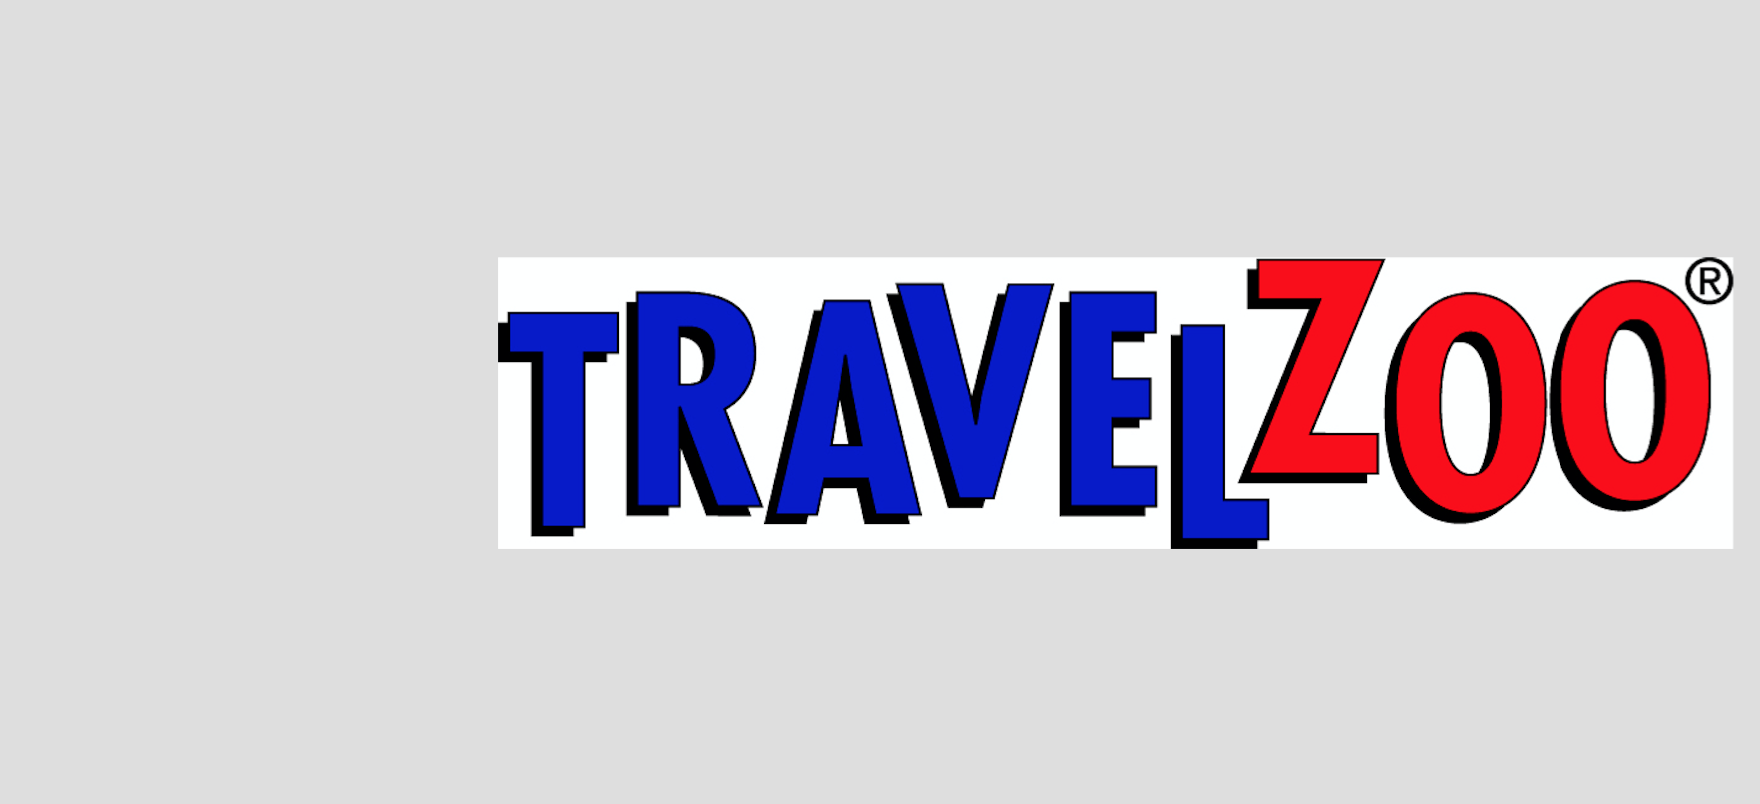 Travelzoo Logo - Interview with Rachel Barnett, General Counsel of Travelzoo